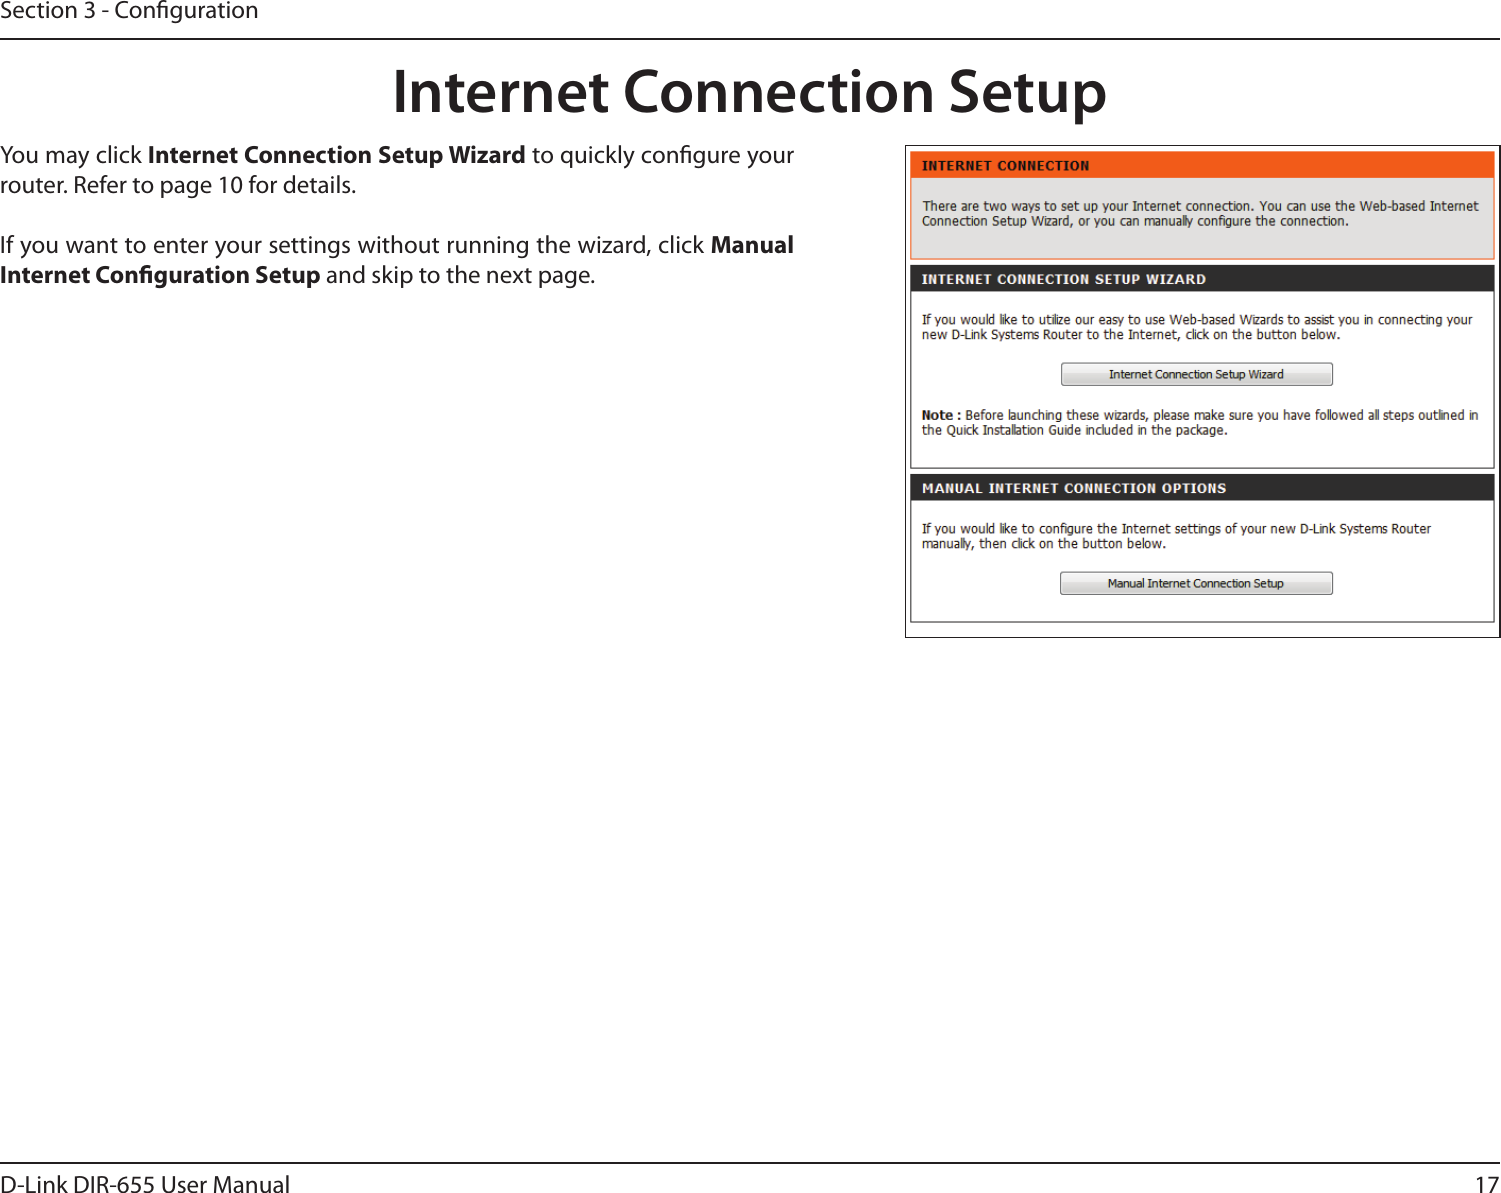 17D-Link DIR-655 User ManualSection 3 - CongurationInternet Connection SetupYou may click Internet Connection Setup Wizard to quickly congure your router. Refer to page 10 for details.If you want to enter your settings without running the wizard, click Manual Internet Conguration Setup and skip to the next page.